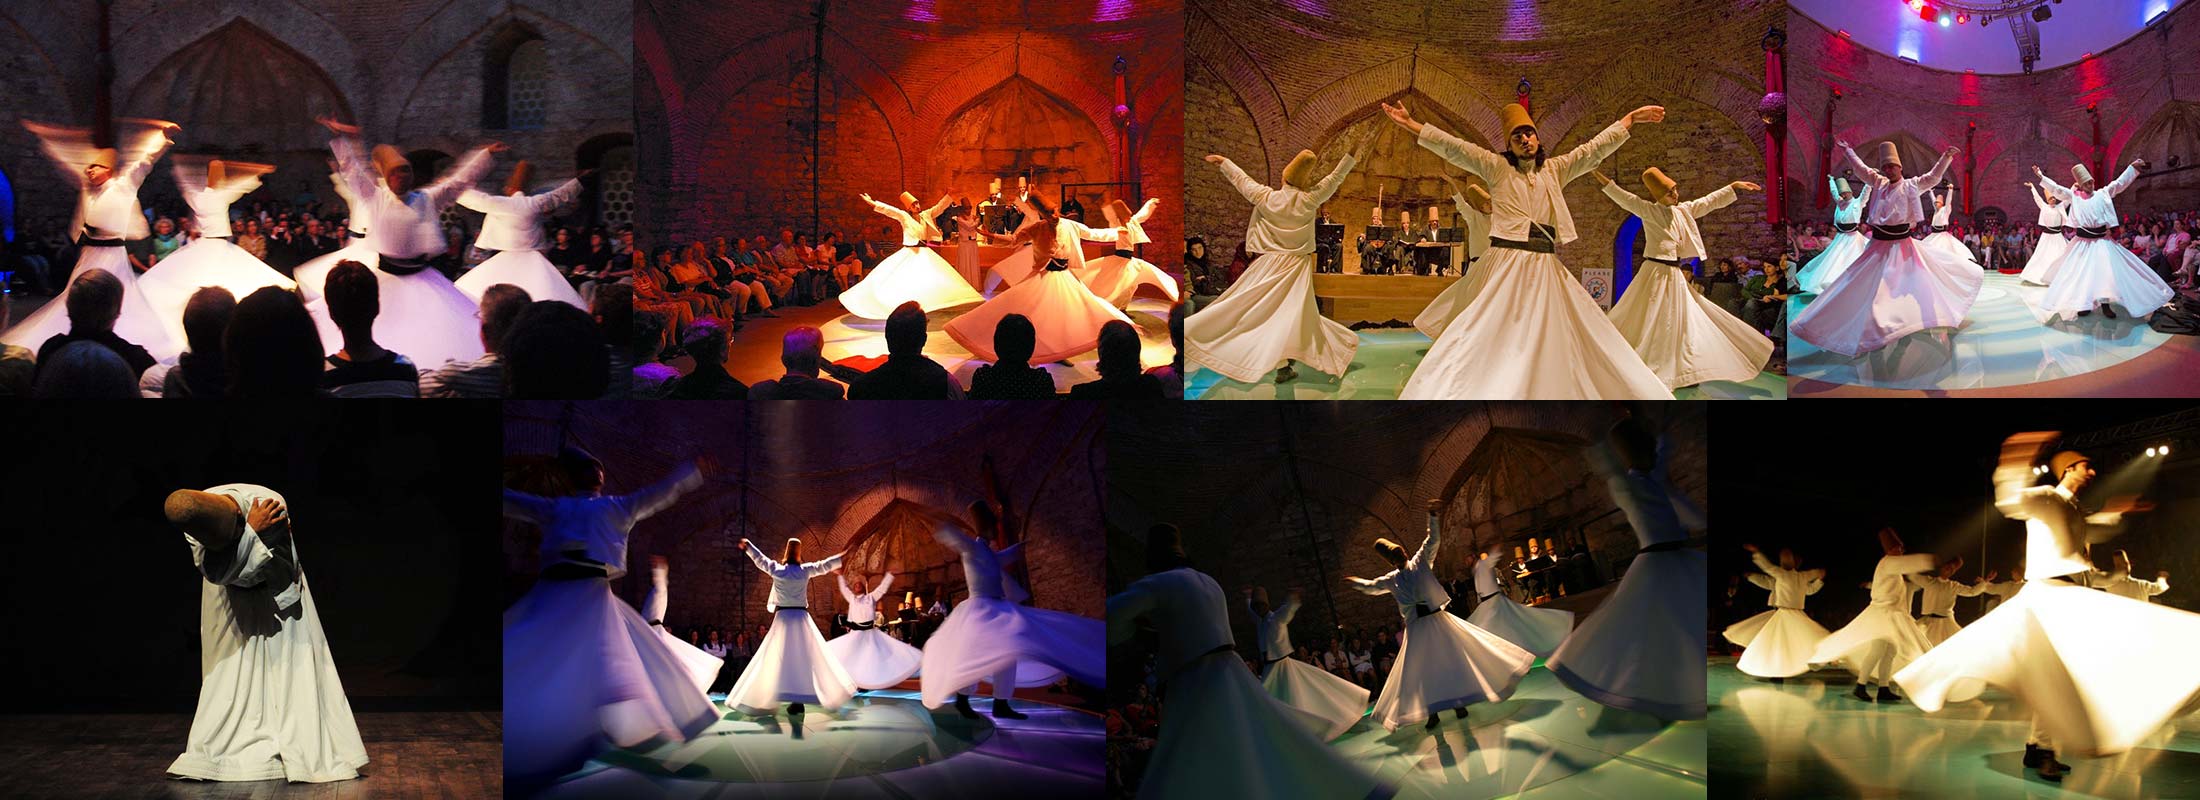 TURKISH-MYSTIC-MUSIC-WHIRLING-DERVISHES